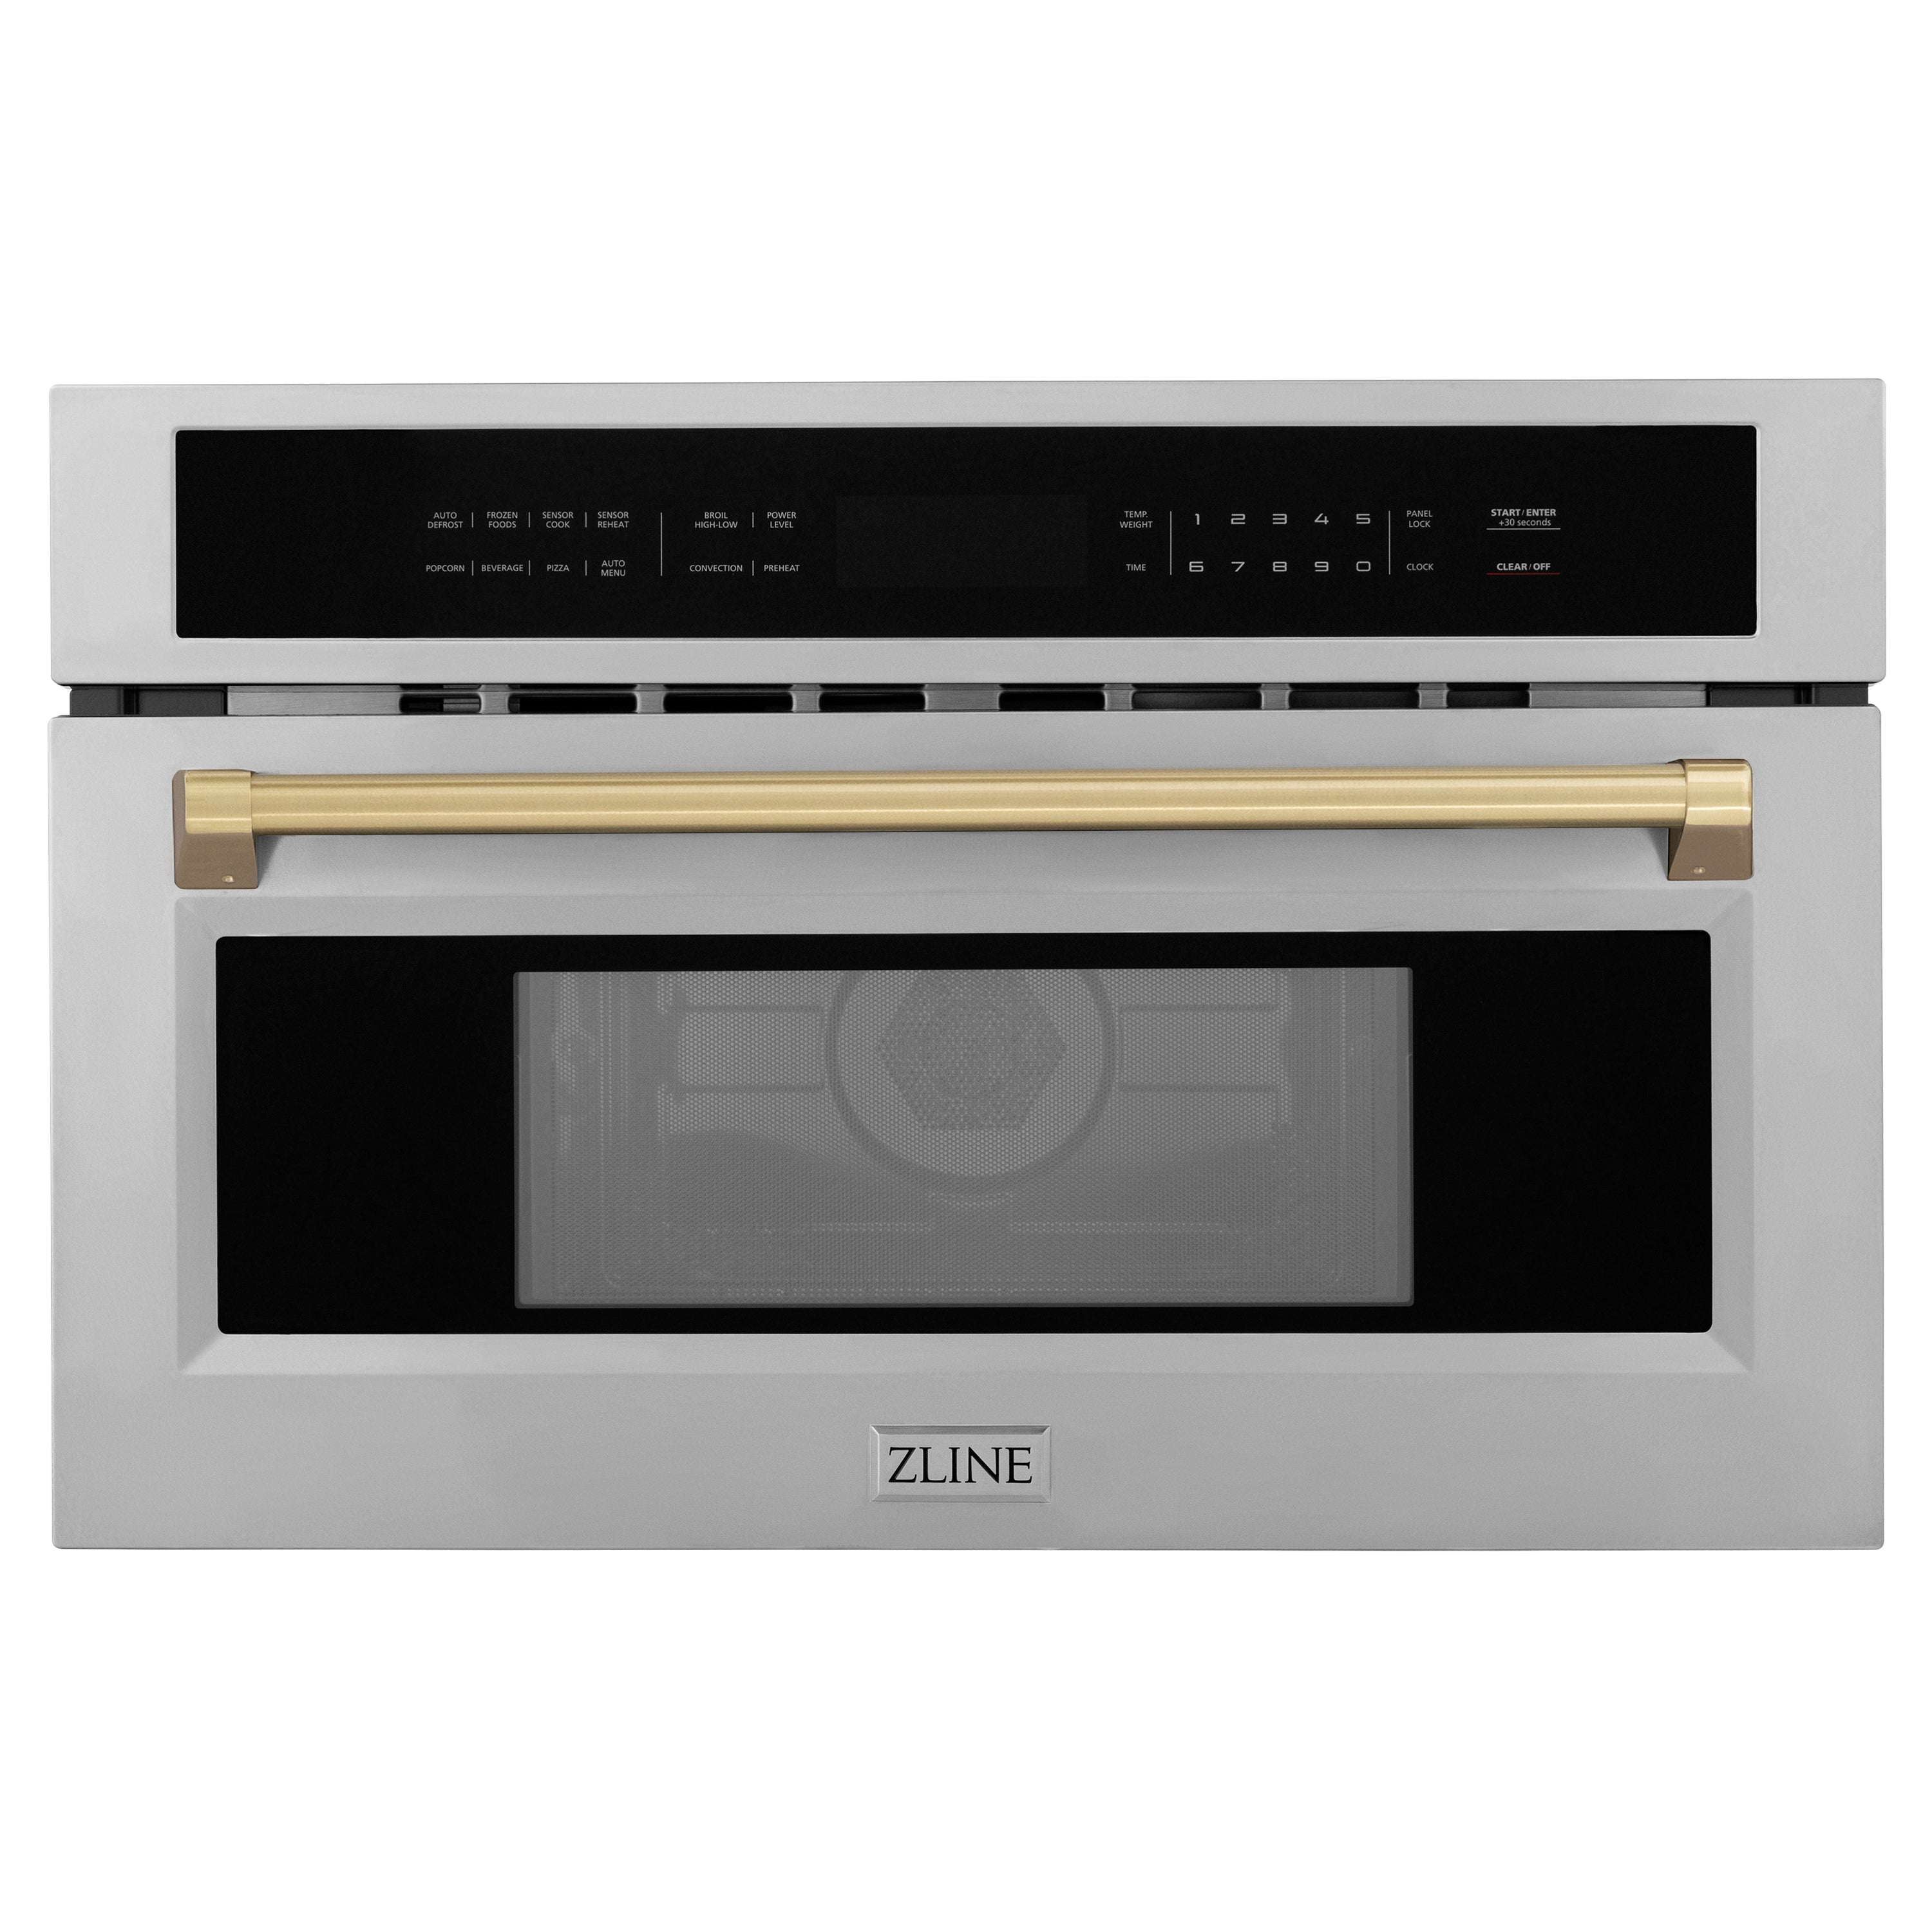 ZLINE Autograph Edition 30 in. 1.6 cu ft. Built-in Convection Microwave Oven in Fingerprint Resistant Stainless Steel with Champagne Bronze Accents (MWOZ-30-SS-CB) Front View Door Closed